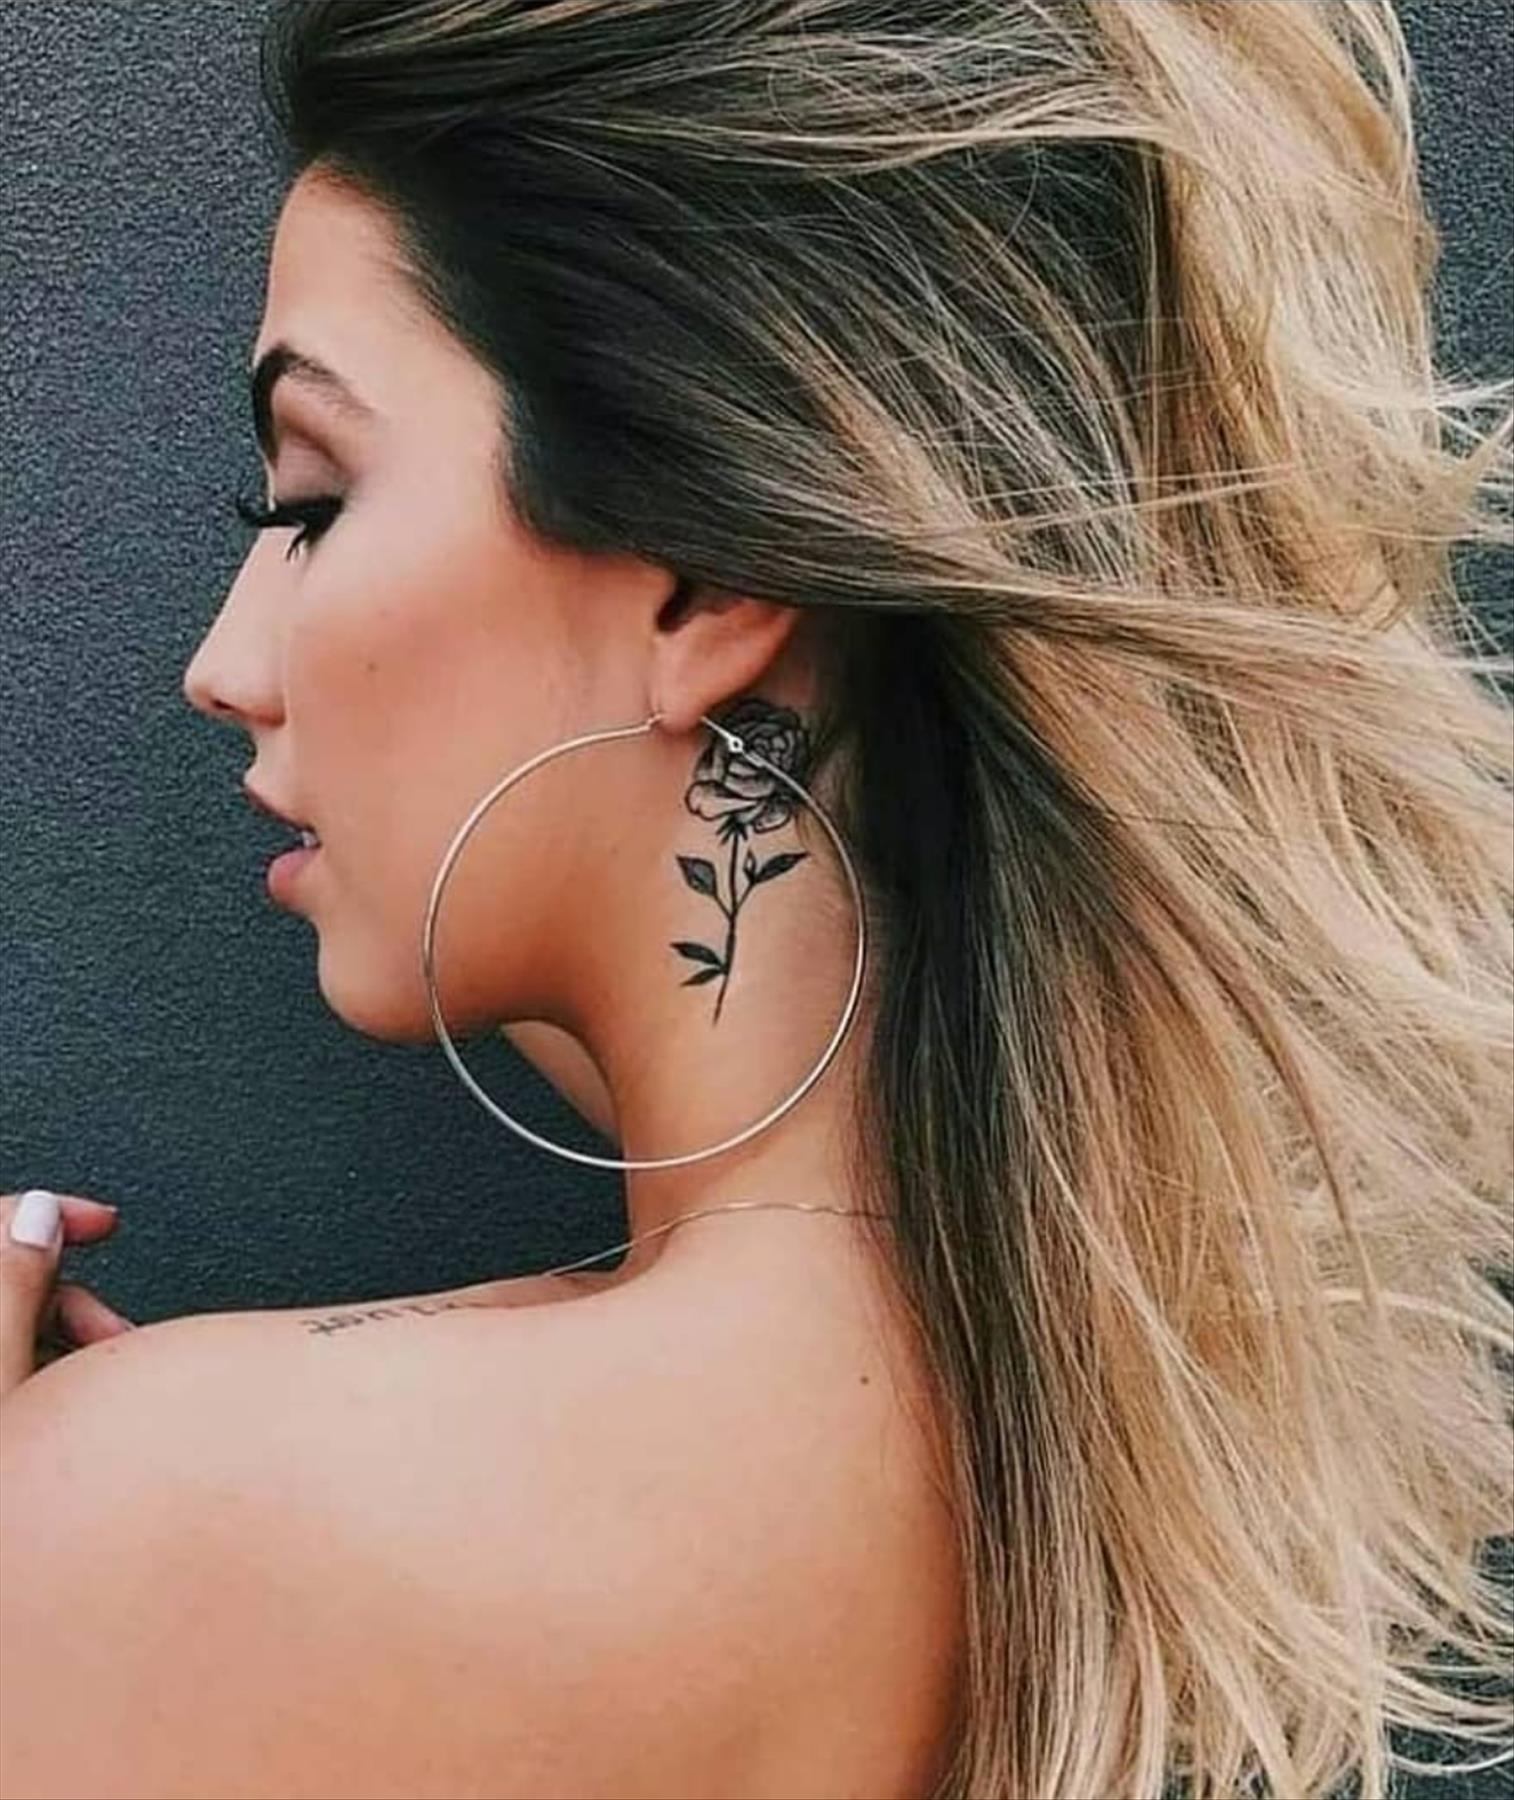 Cool behind the ear tattoos design for girls